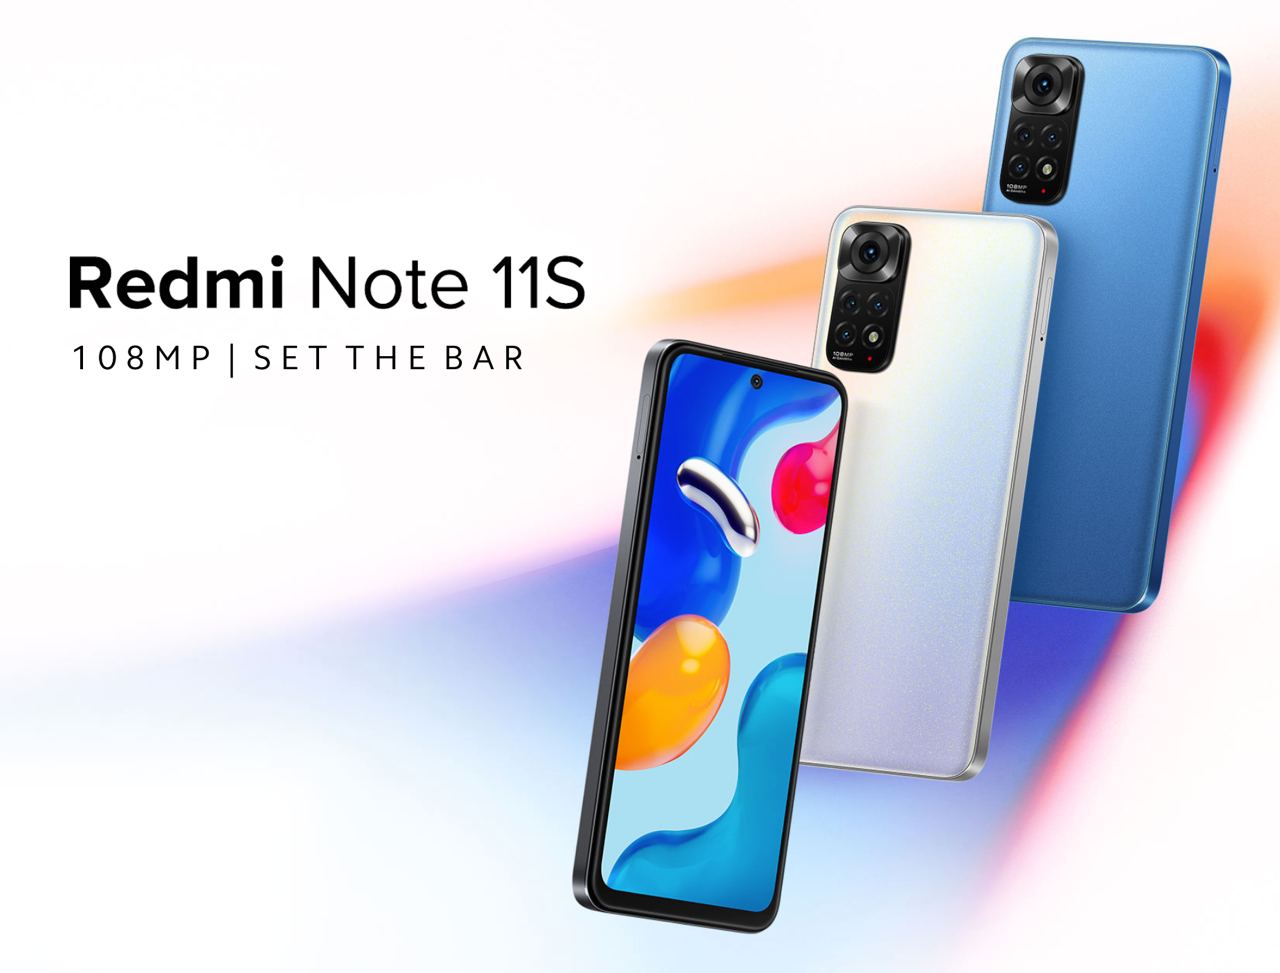 Redmi Note 11S In Rs.99 Flash Sale : How To Buy This